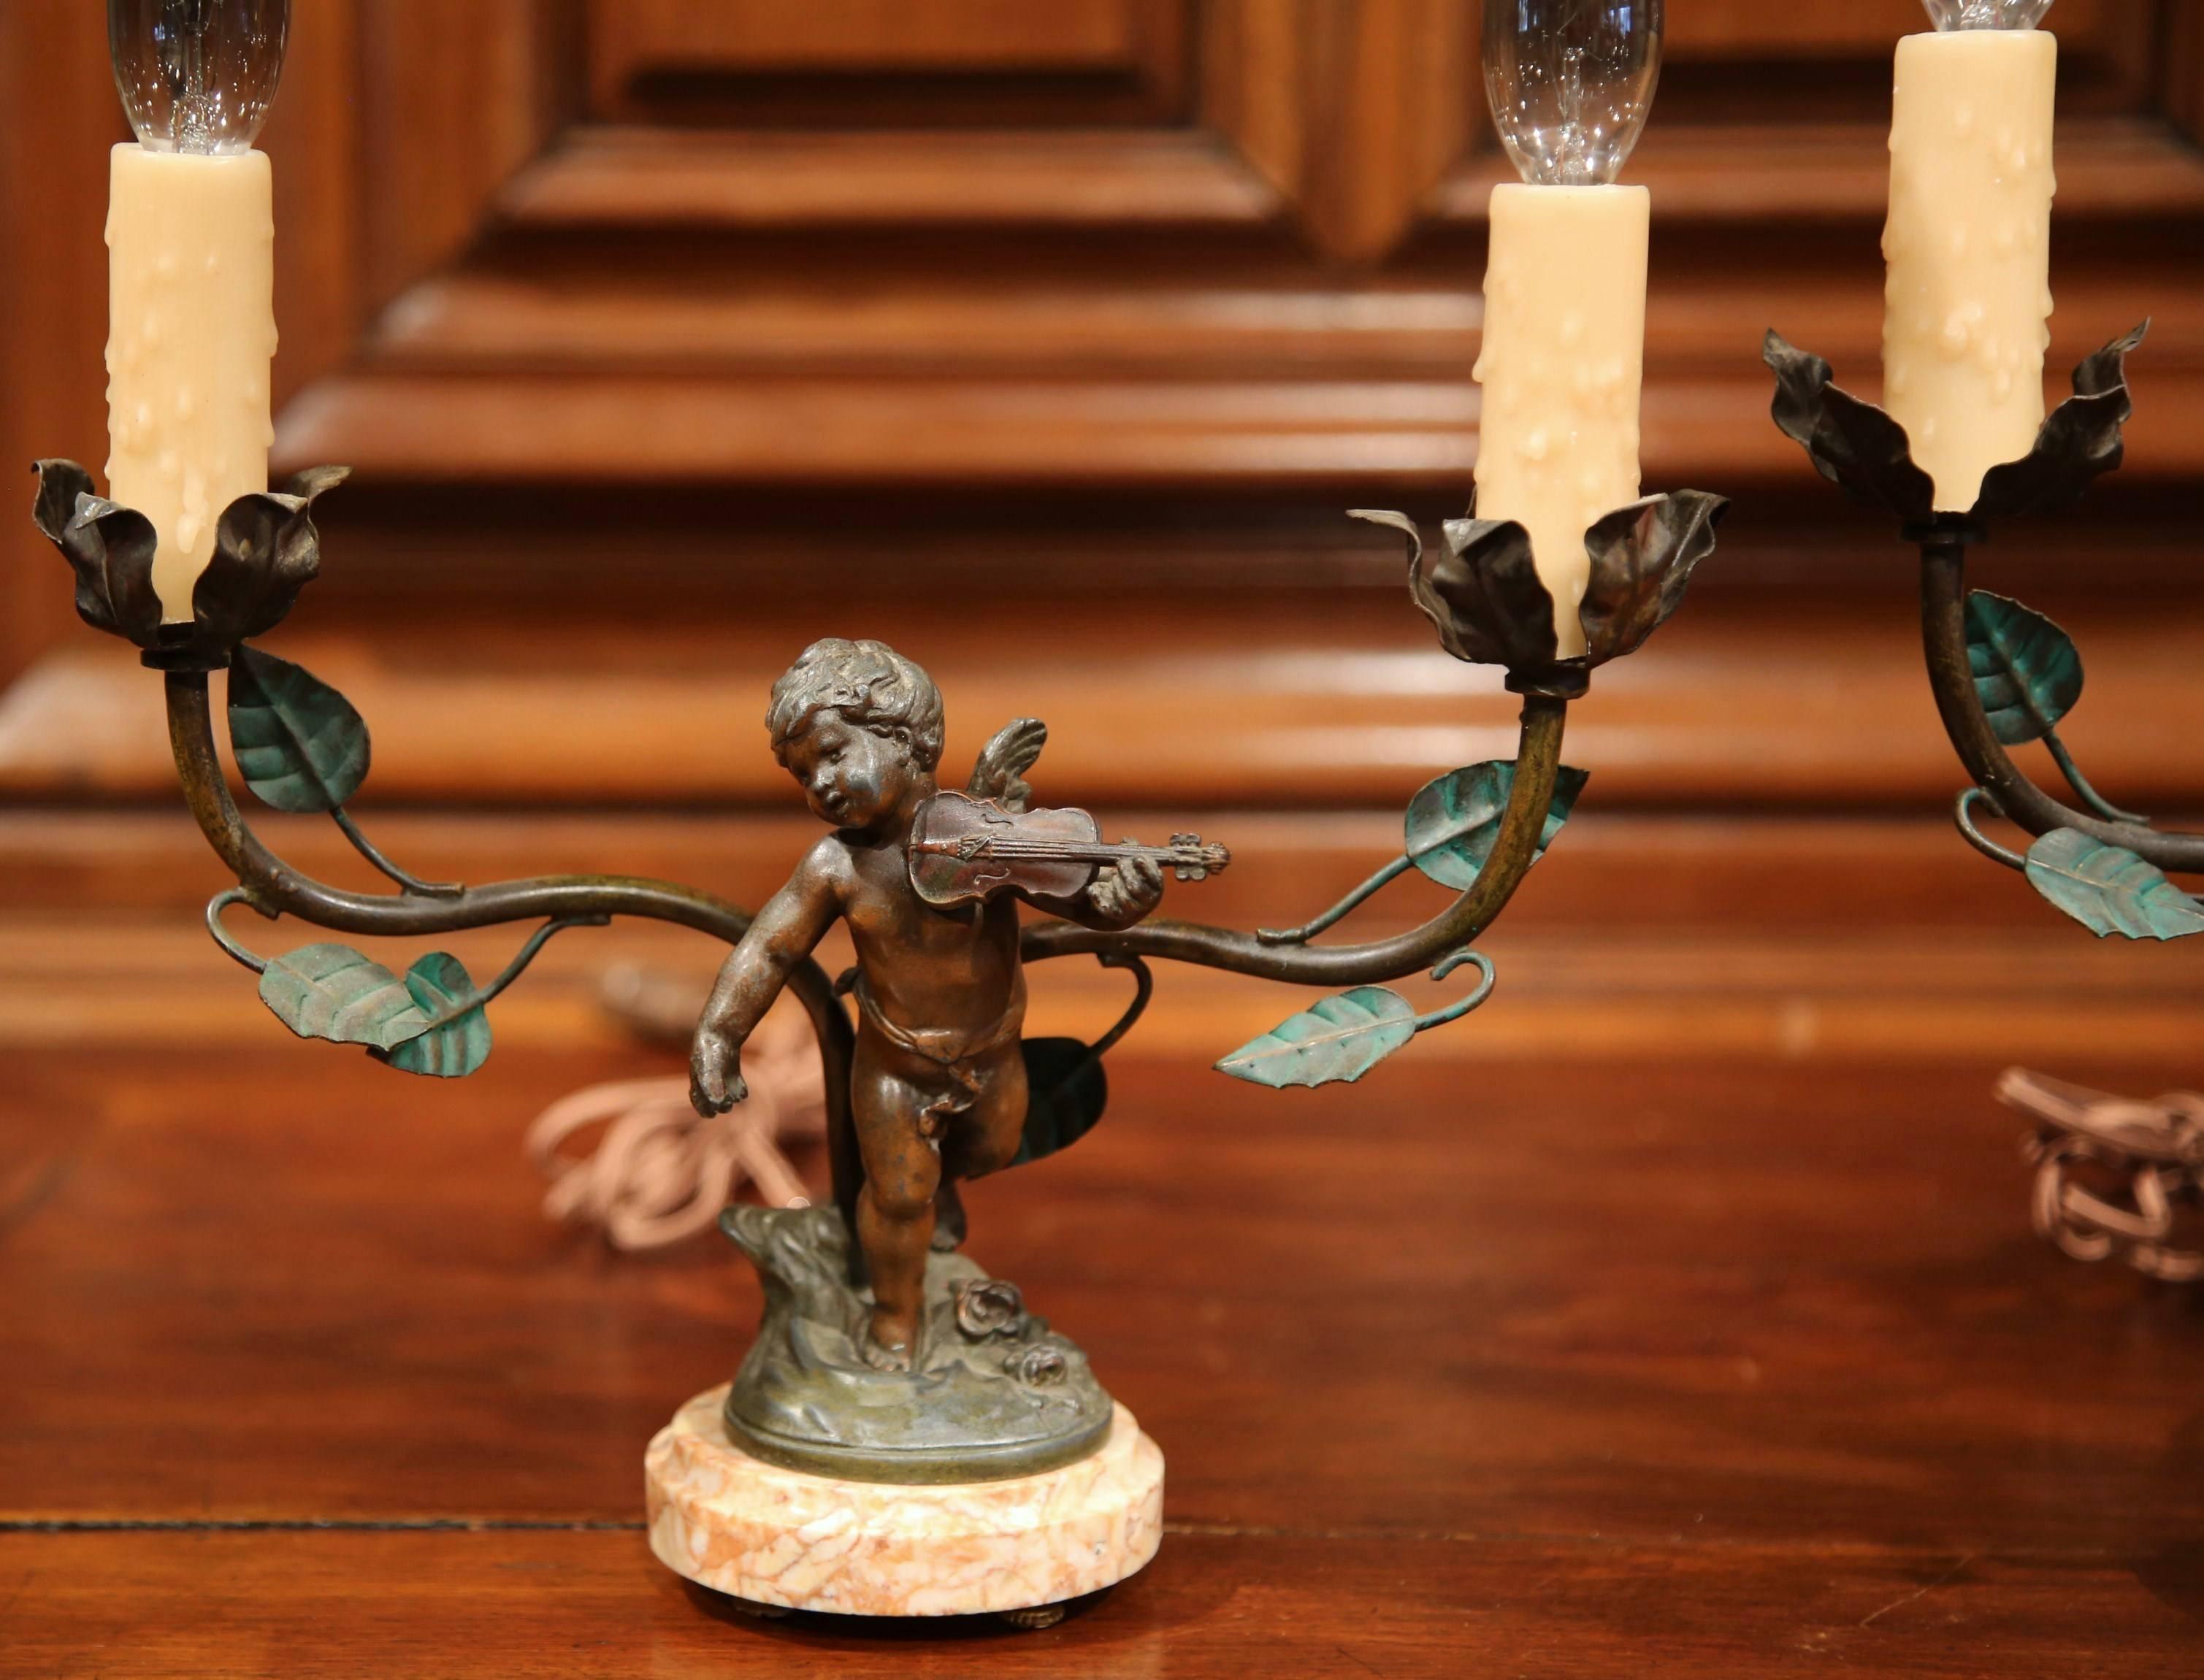 This fine pair of antique table lamps were crafted in France, circa 1870. Each lamp features a patinated winged cherub with two lights covered with leaves. One of the base 